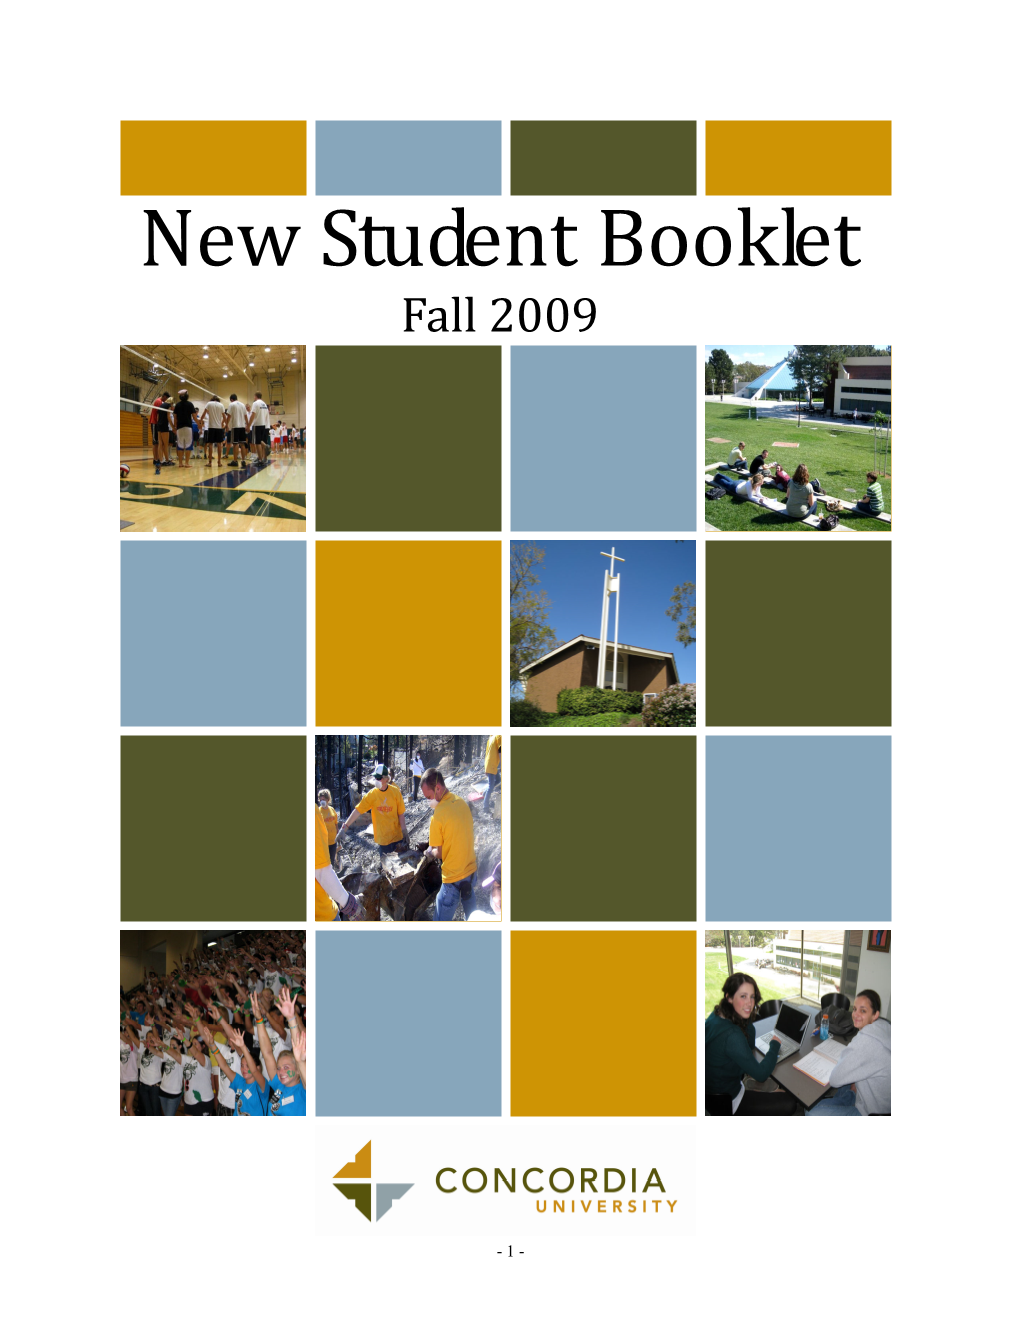 New Student Booklet Fall 2009